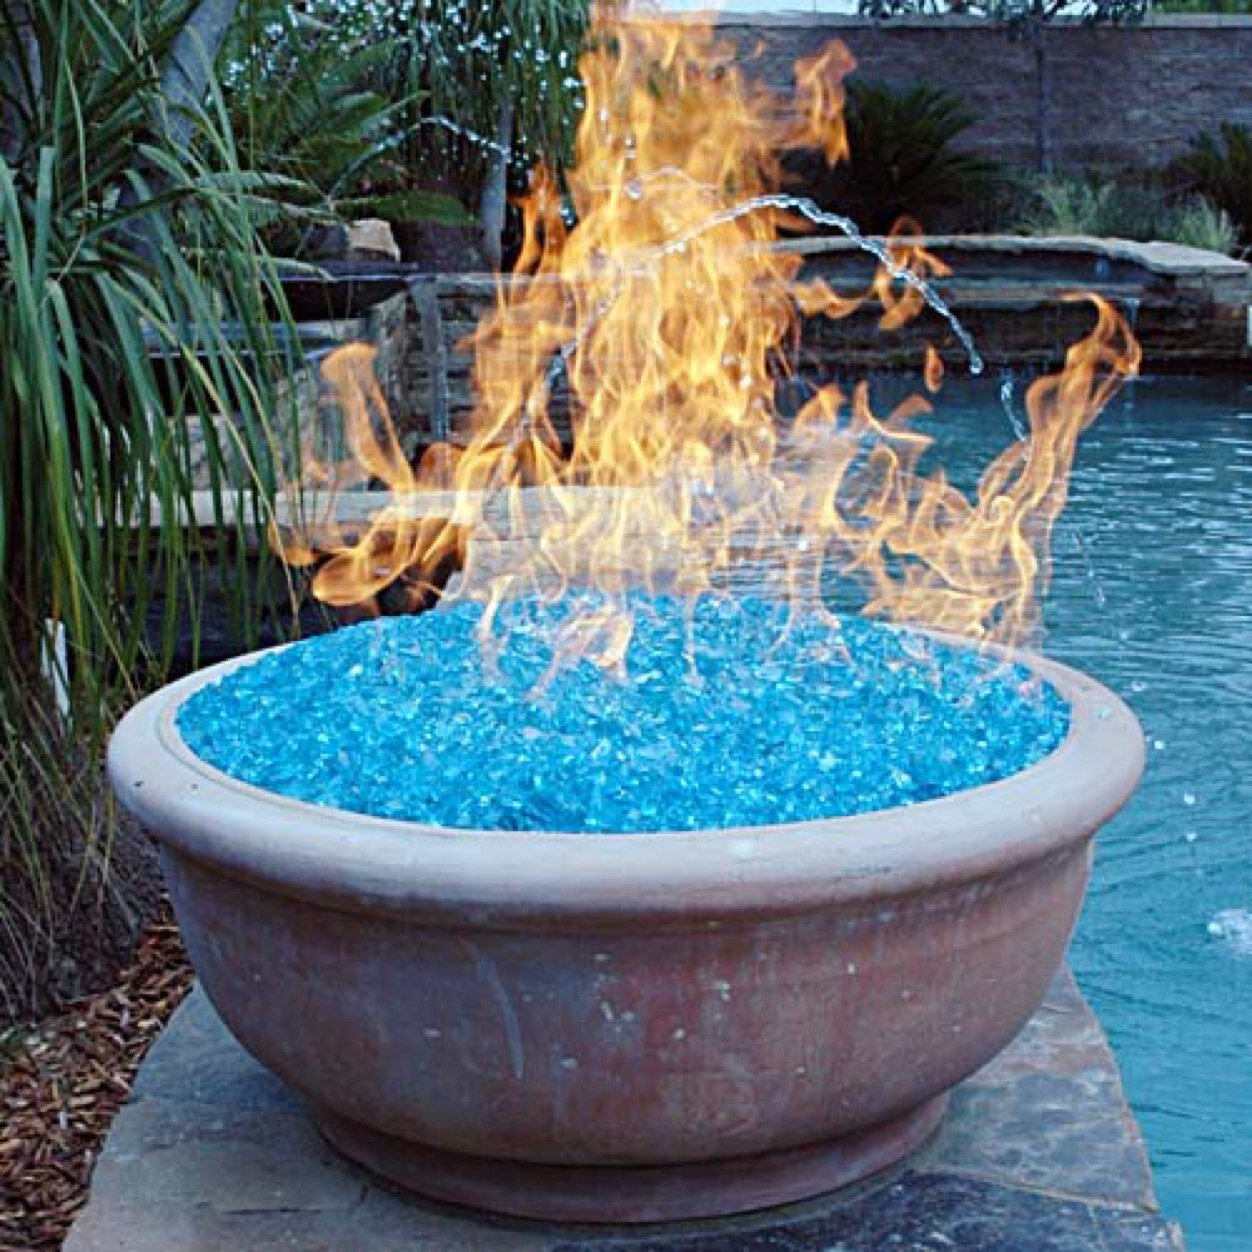 Fireglass Company specializes in the sale and instalation of fireglass and accesories